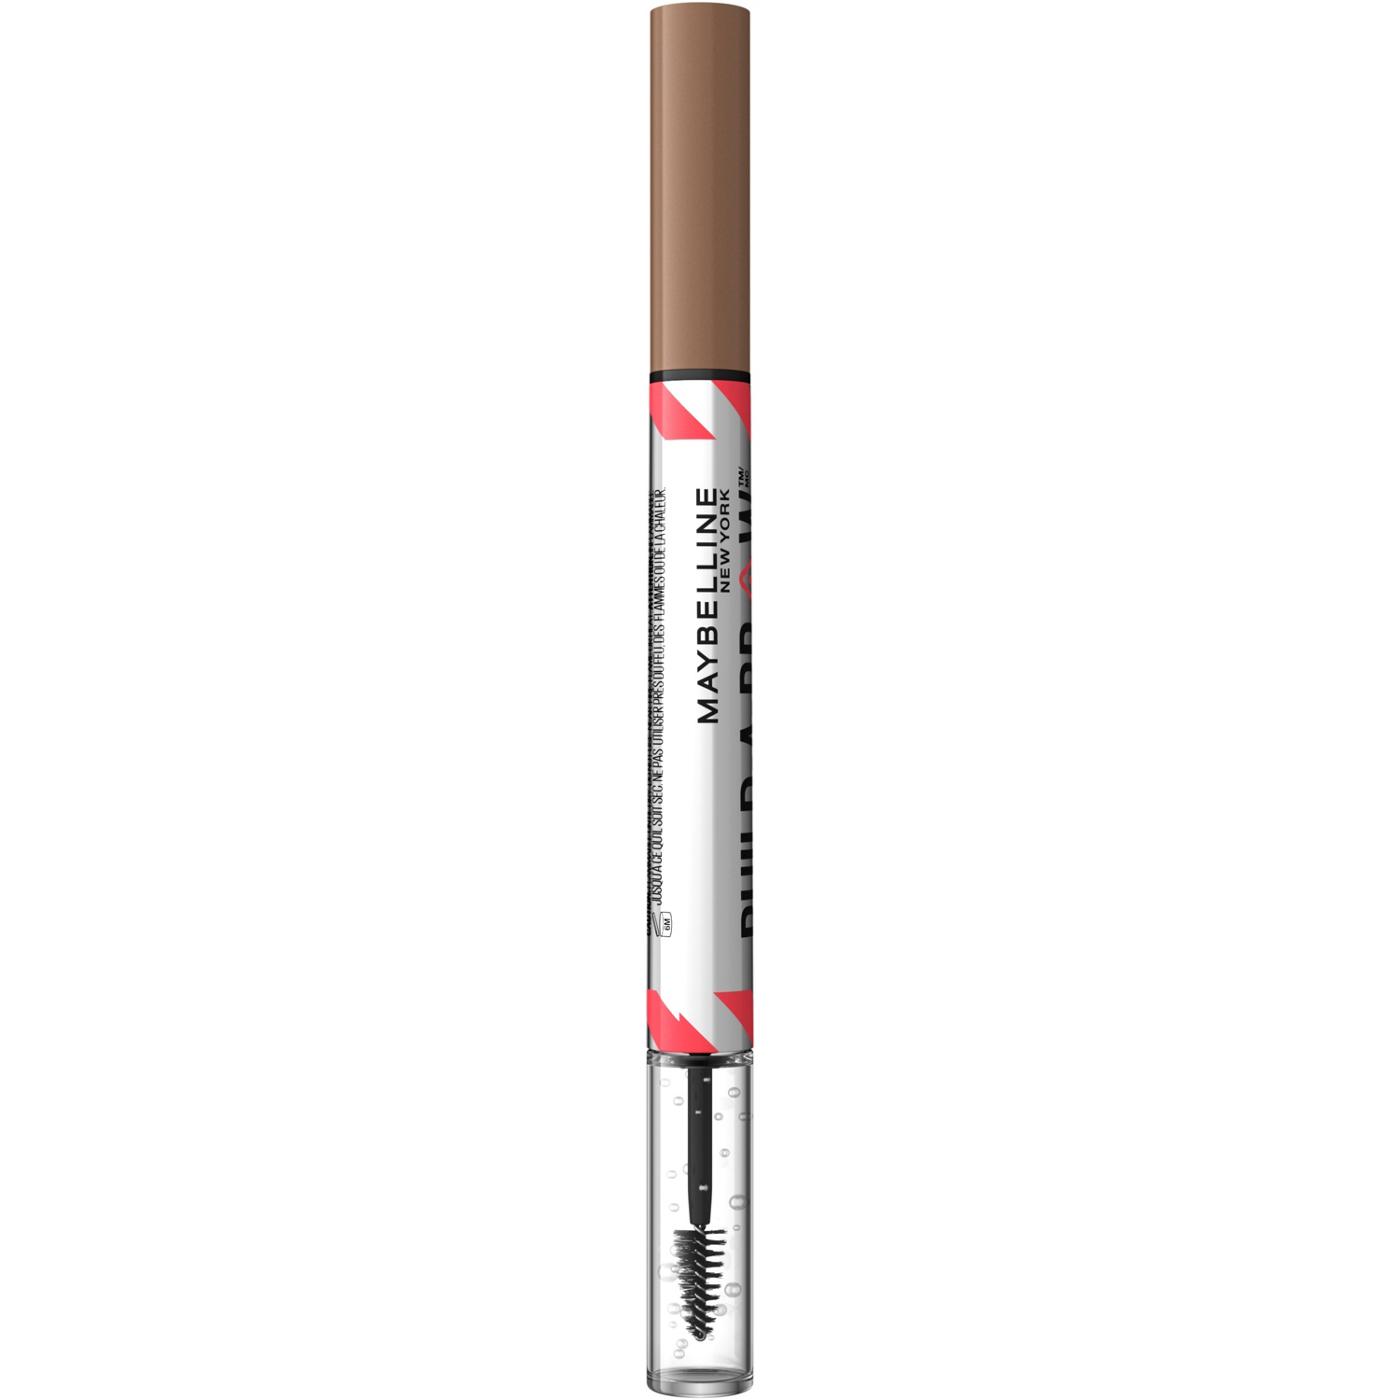 Maybelline Build A Brow 2 In 1 Brow Pen - Soft Brown; image 9 of 16